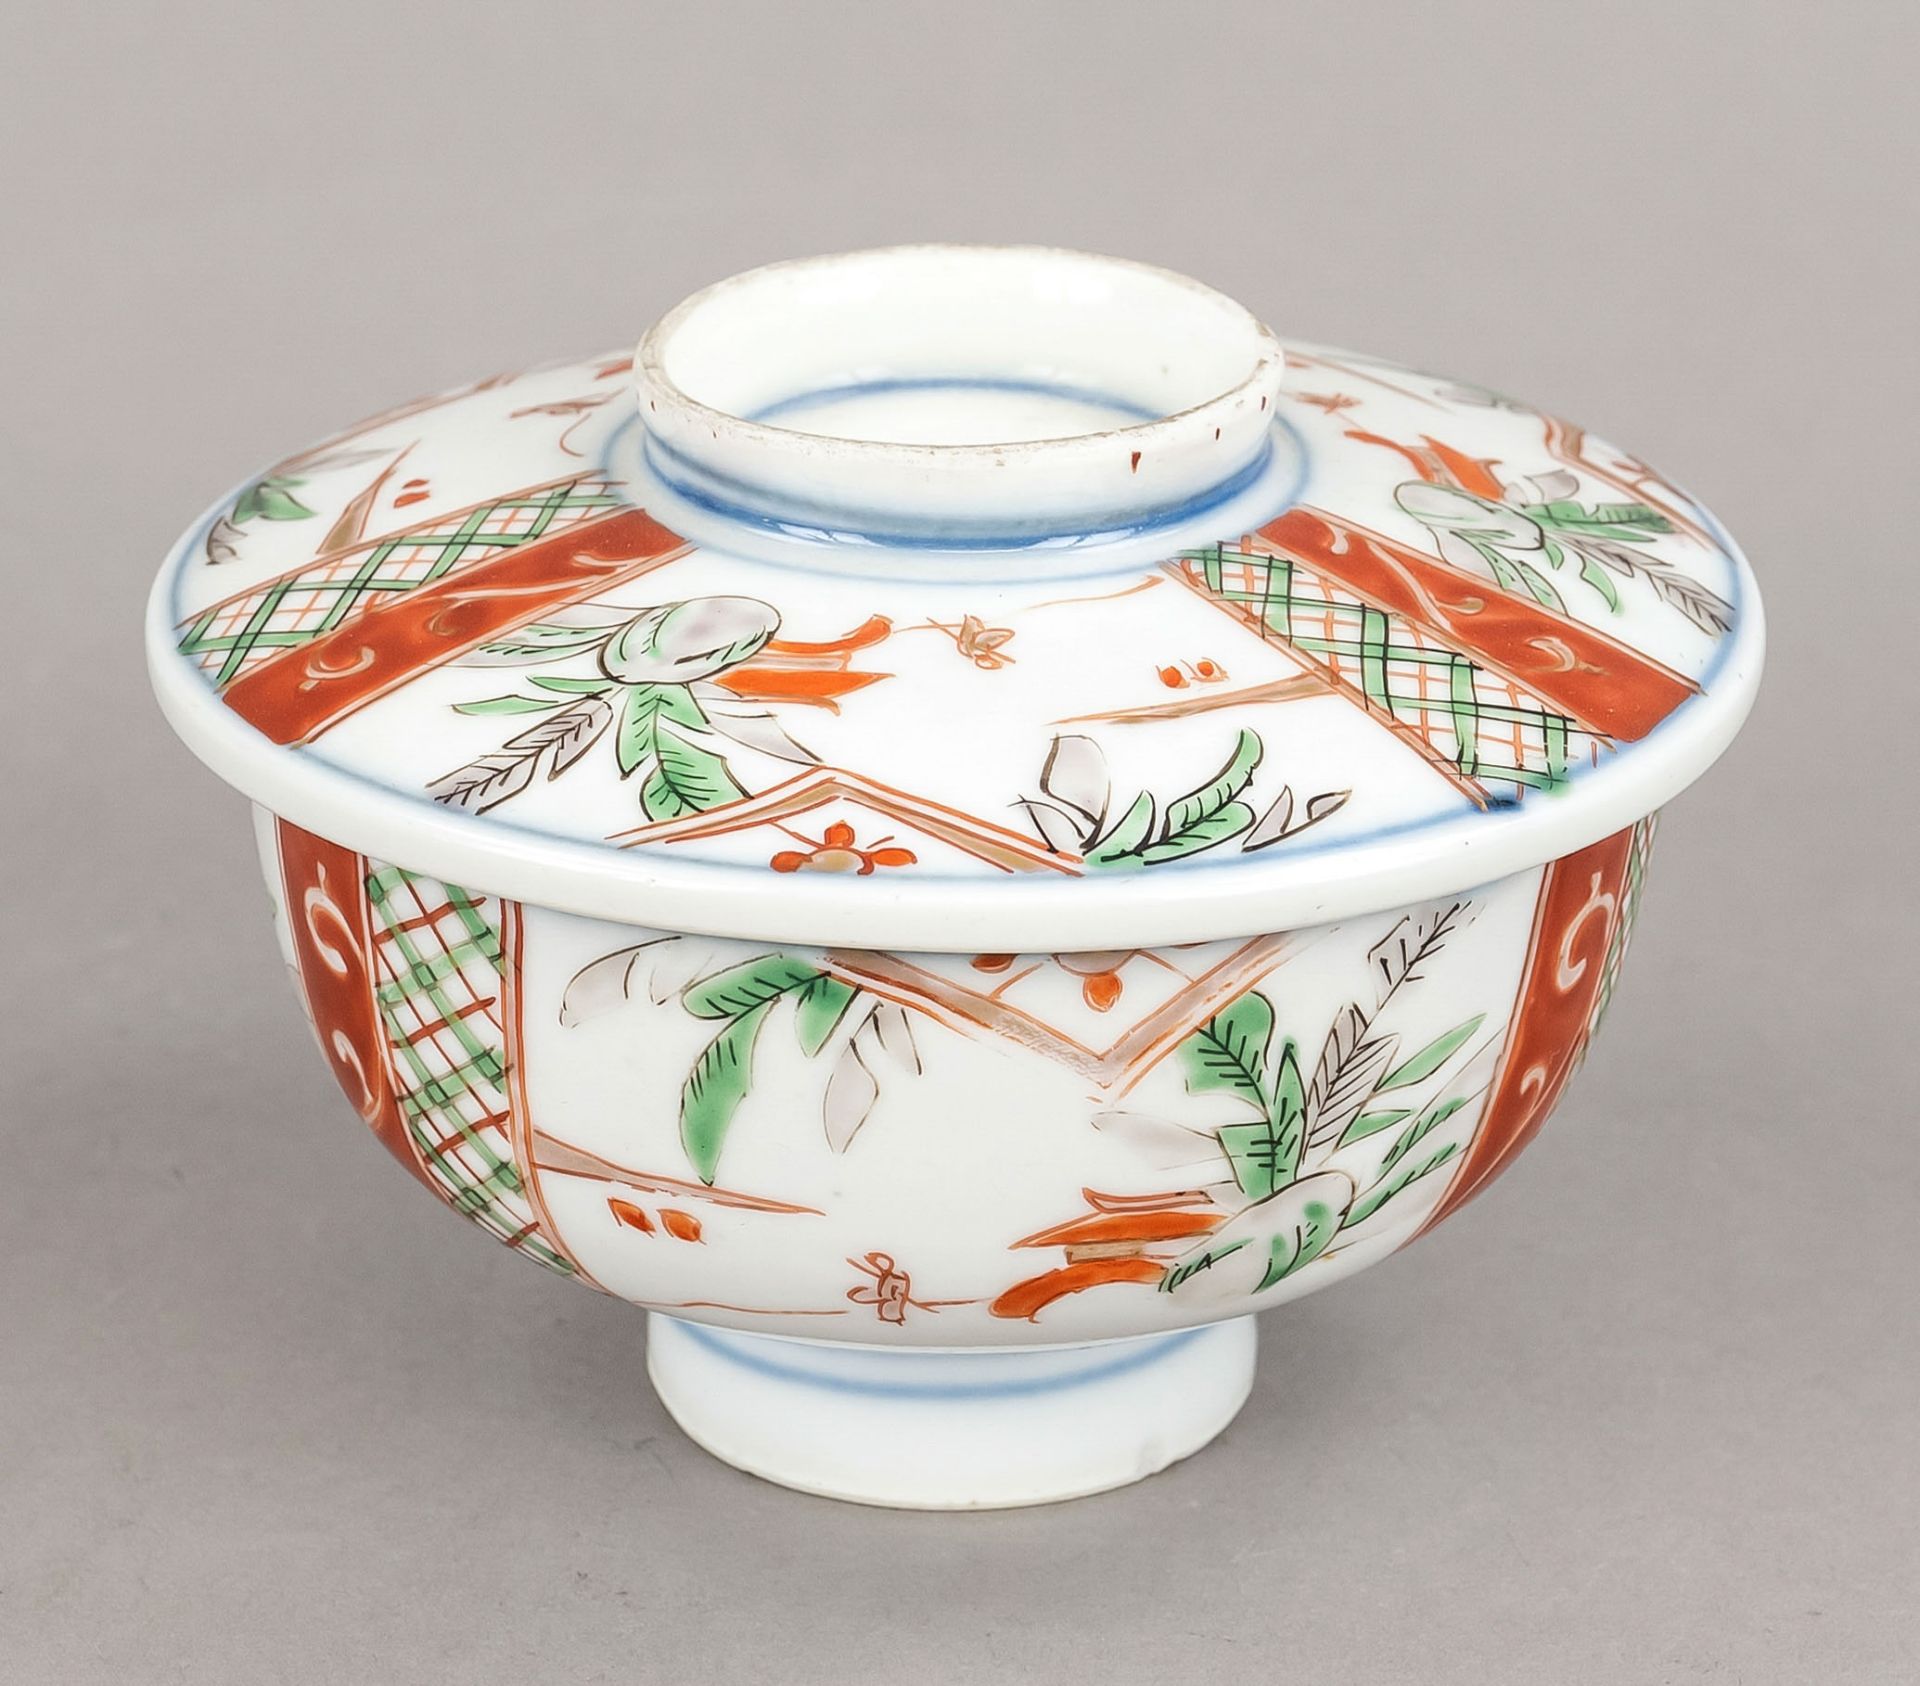 Chawan with lid, Japan, 19th century, porcelain with polychrome glaze decoration of Chinese sage